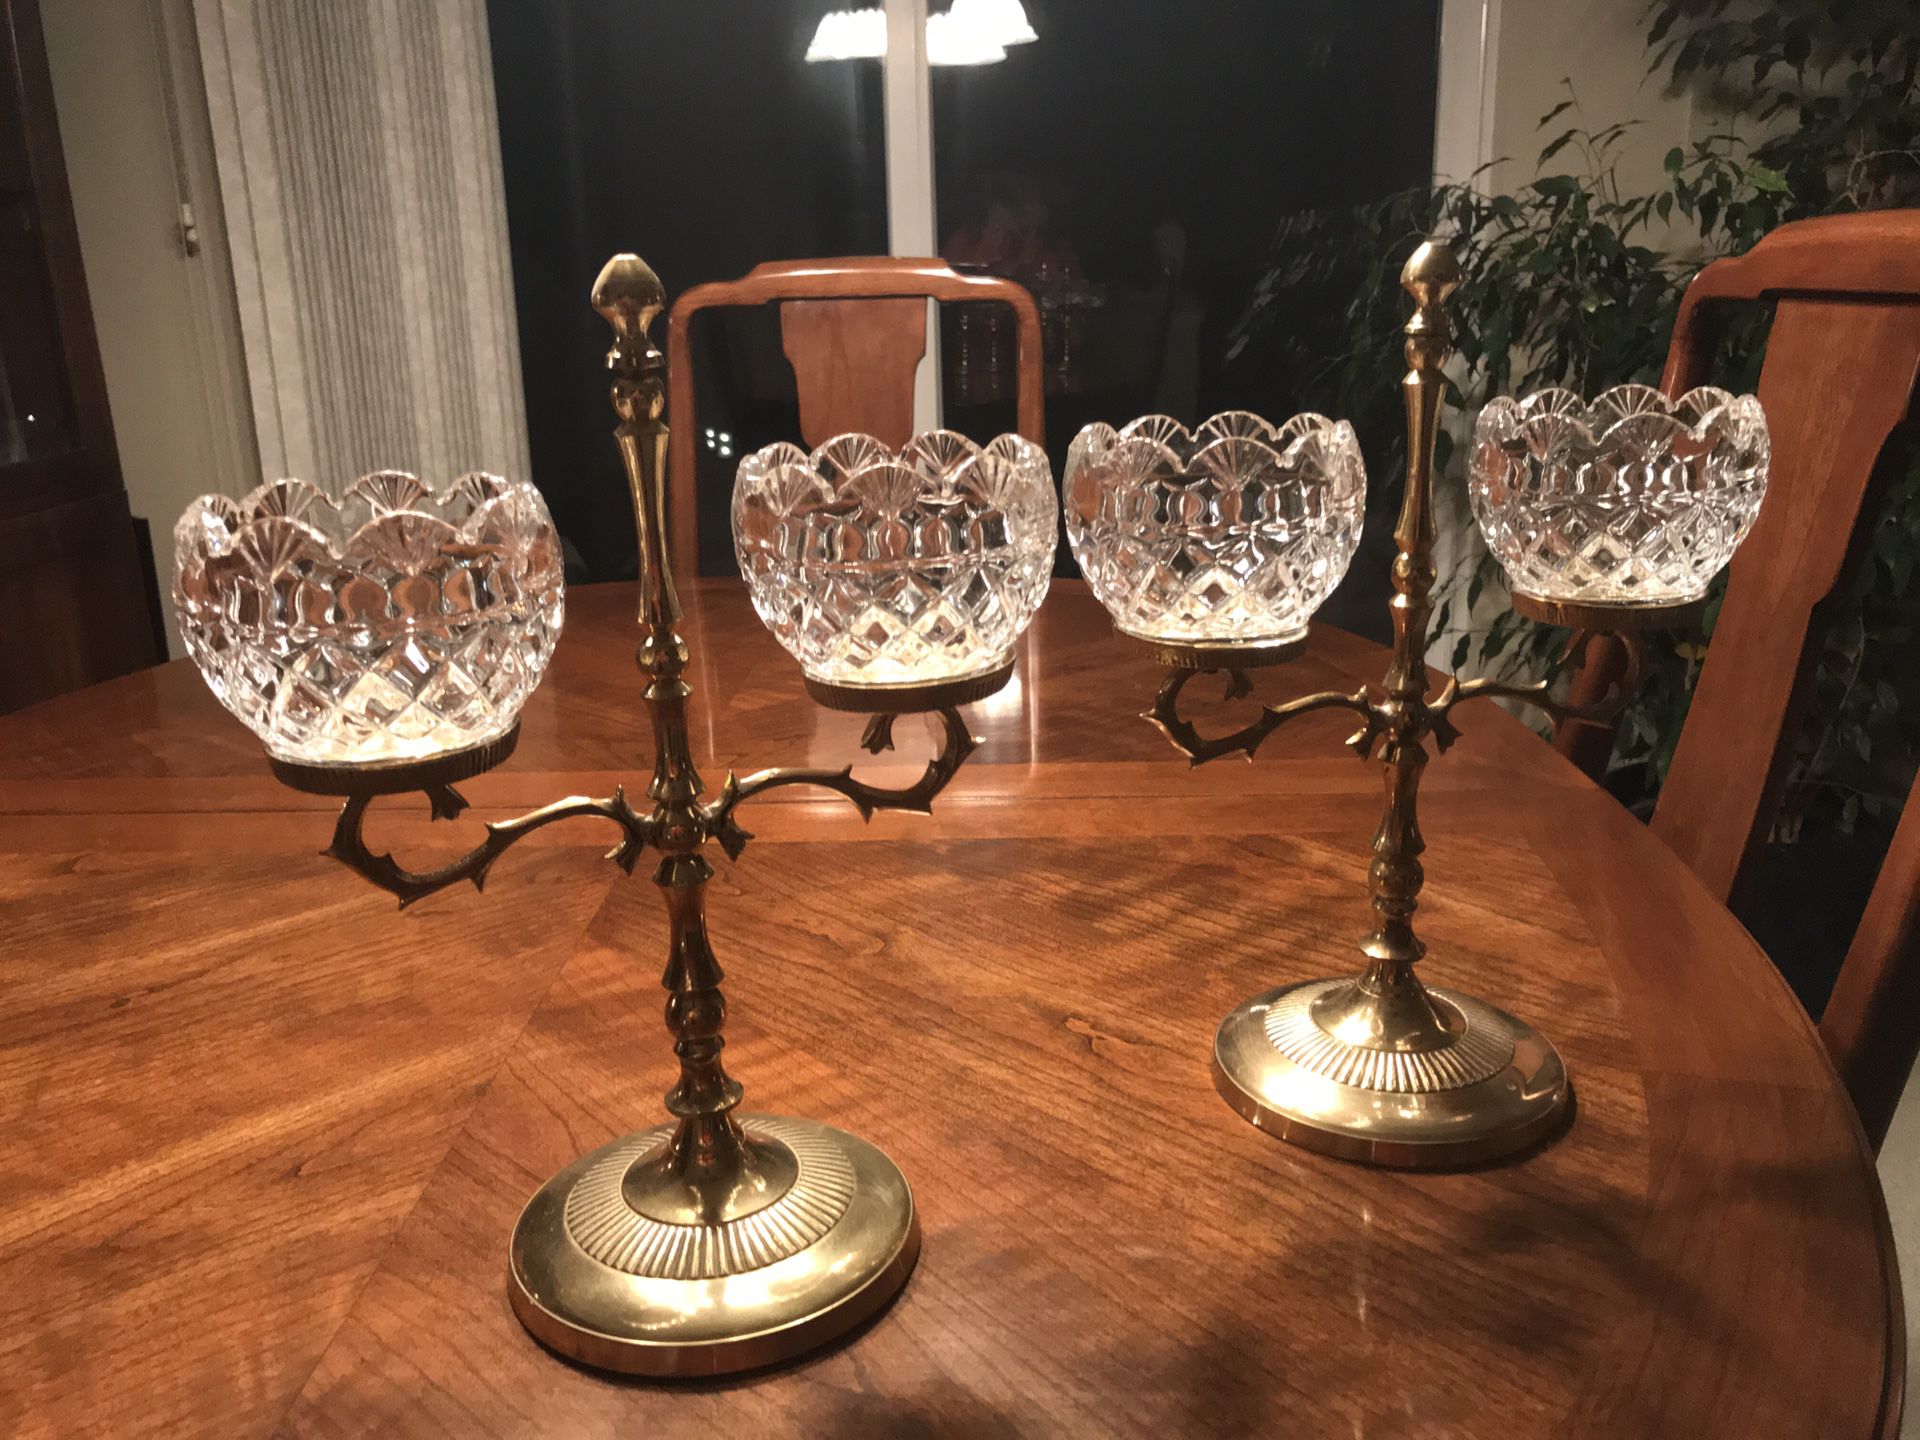 Royal Irish crystal and solid brass candelabras